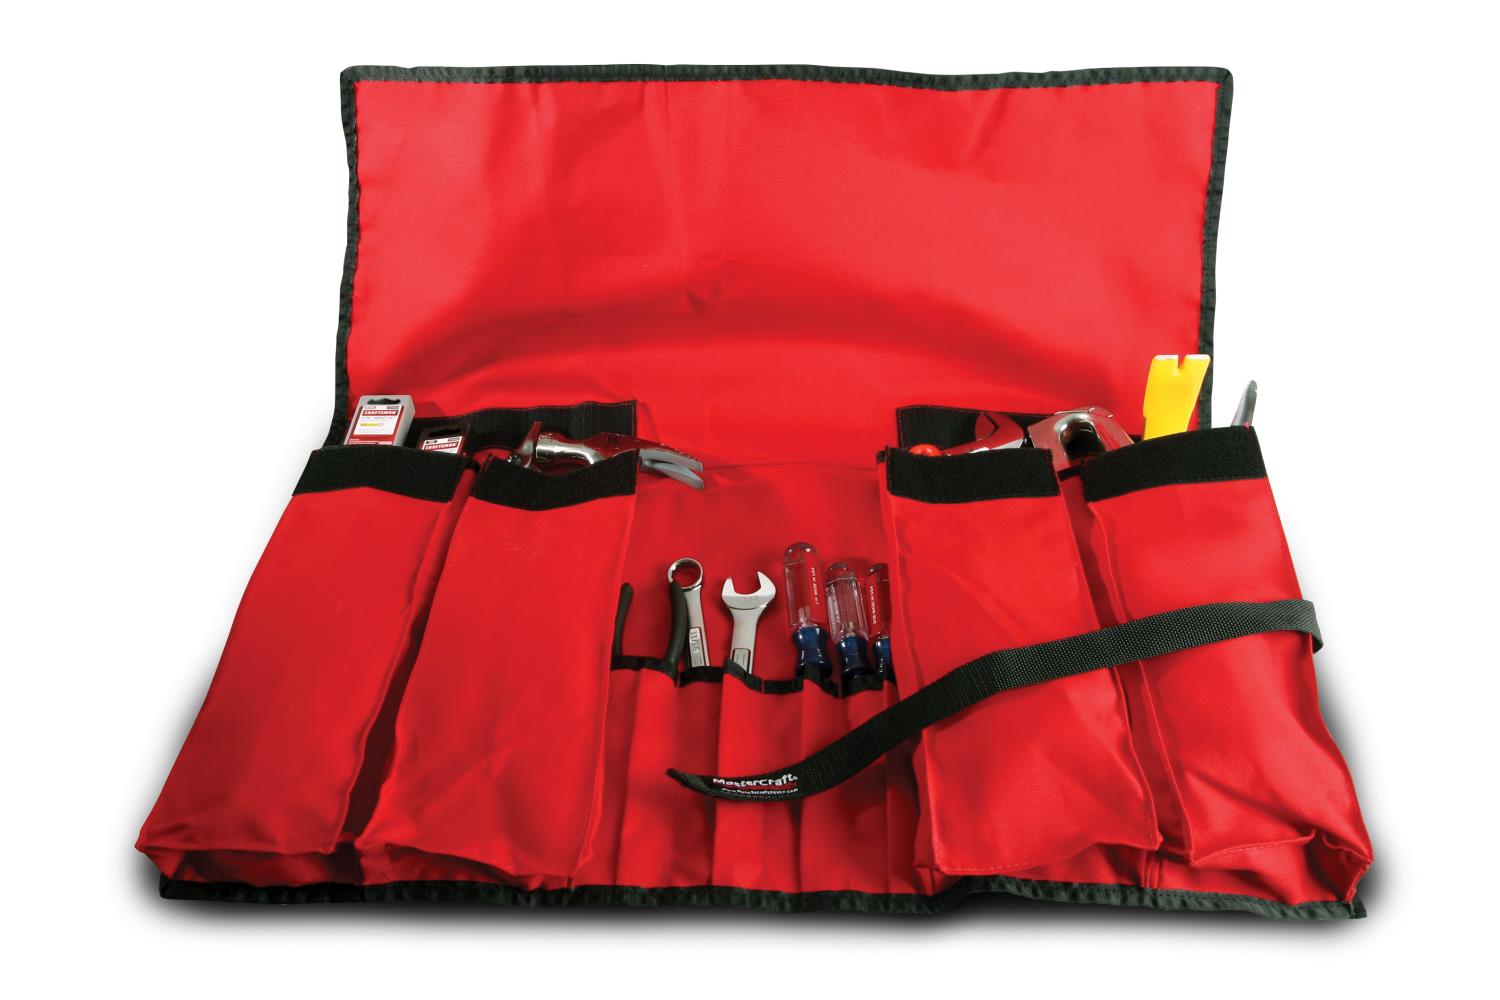 640178 4 Pocket Roll-up, 28 3/4w x 29t  4 slots/14 in. folded, Red